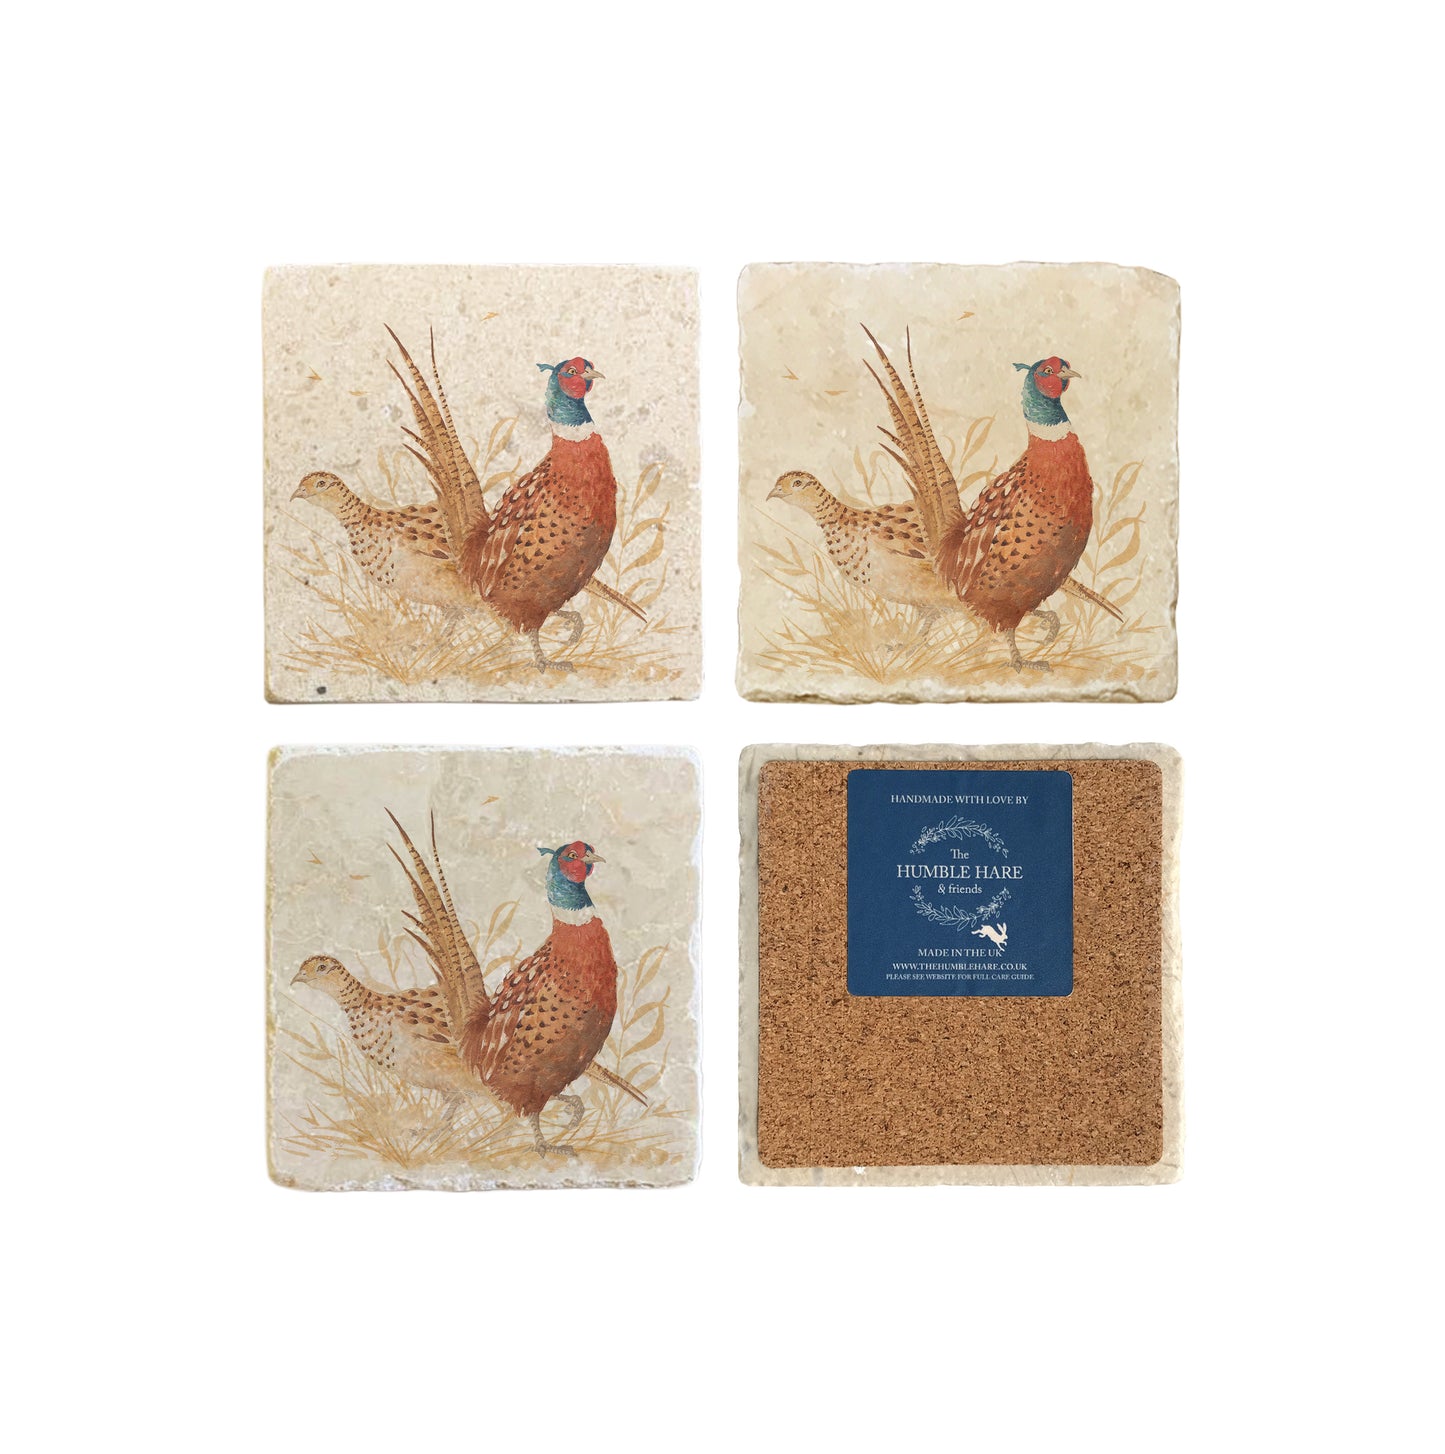 A set of 4 square marble coasters, featuring a watercolour design of a pair of pheasants. One coaster is flipped to show that the coasters are backed with cork.